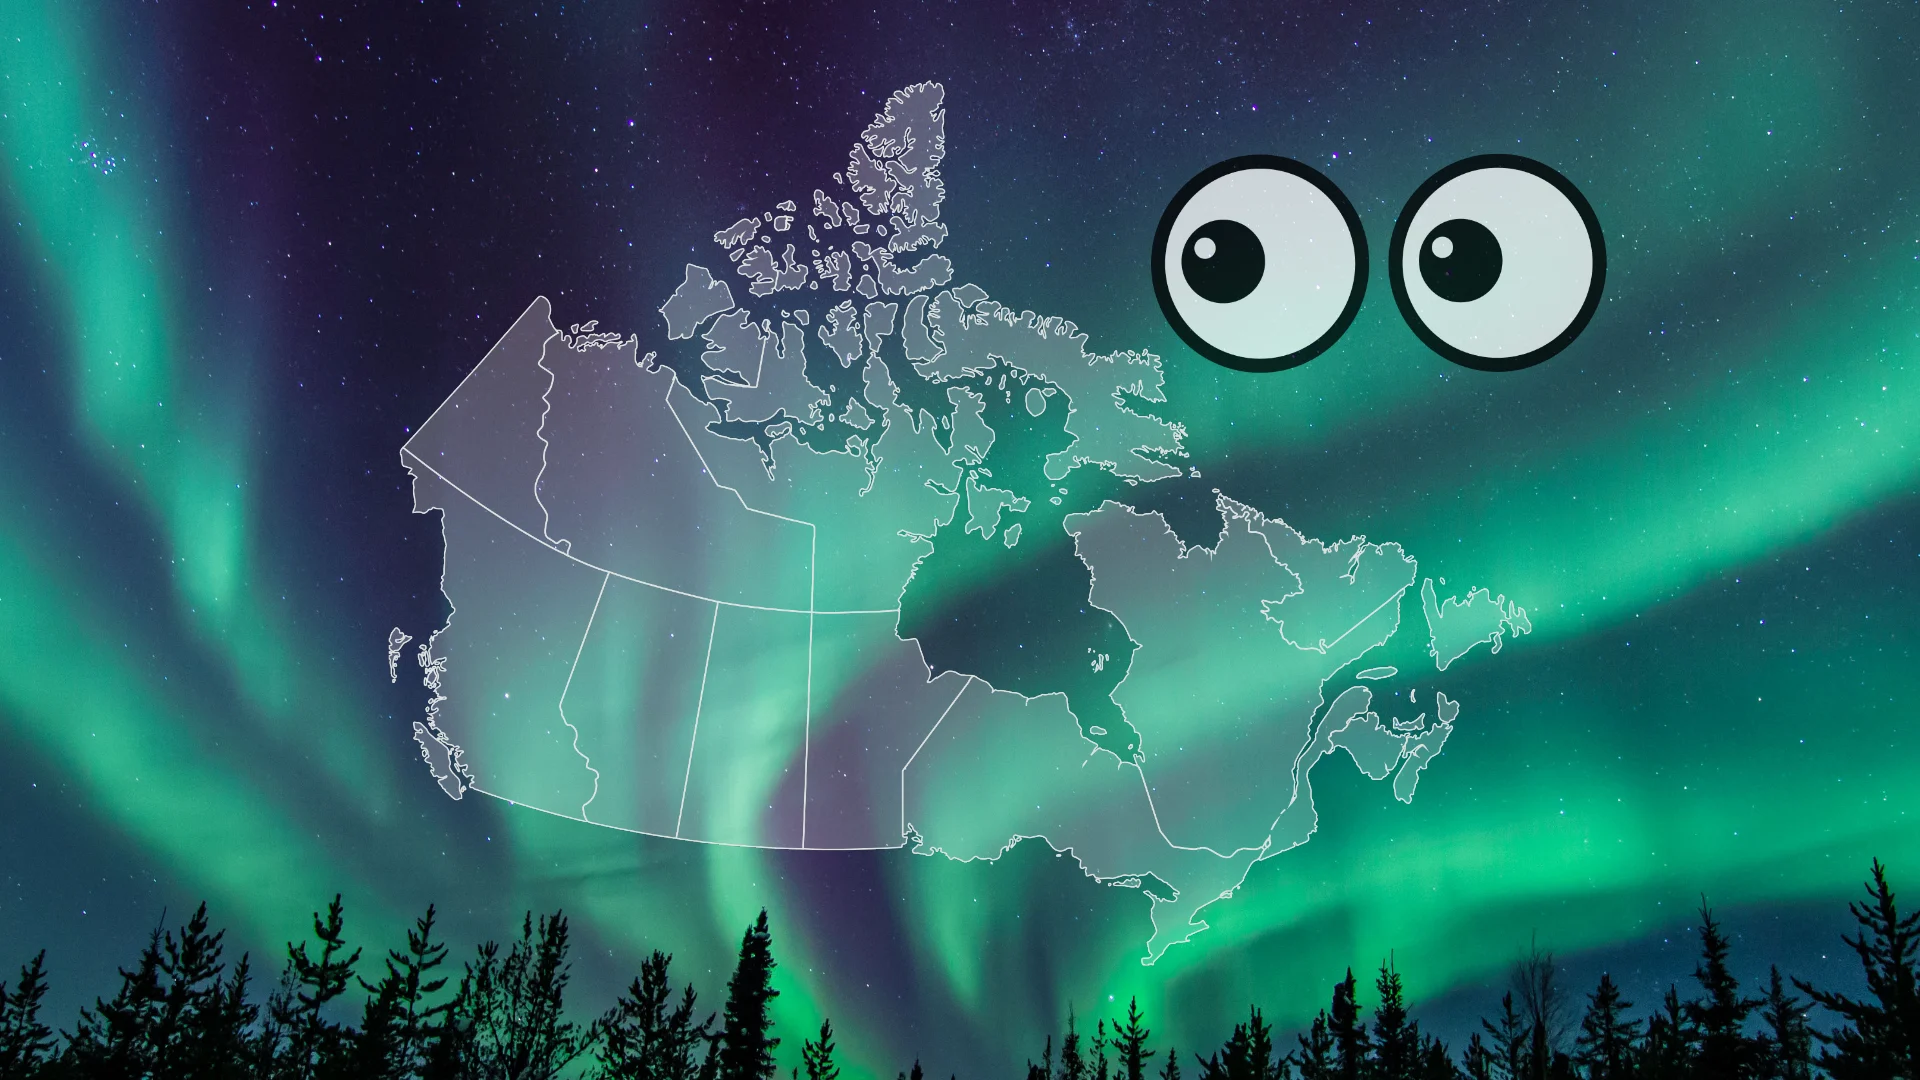 Tonight’s geomagnetic storm has been upgraded to the strongest in 20 years. Widespread auroras expected. Get Ontario’s viewing forecast, here